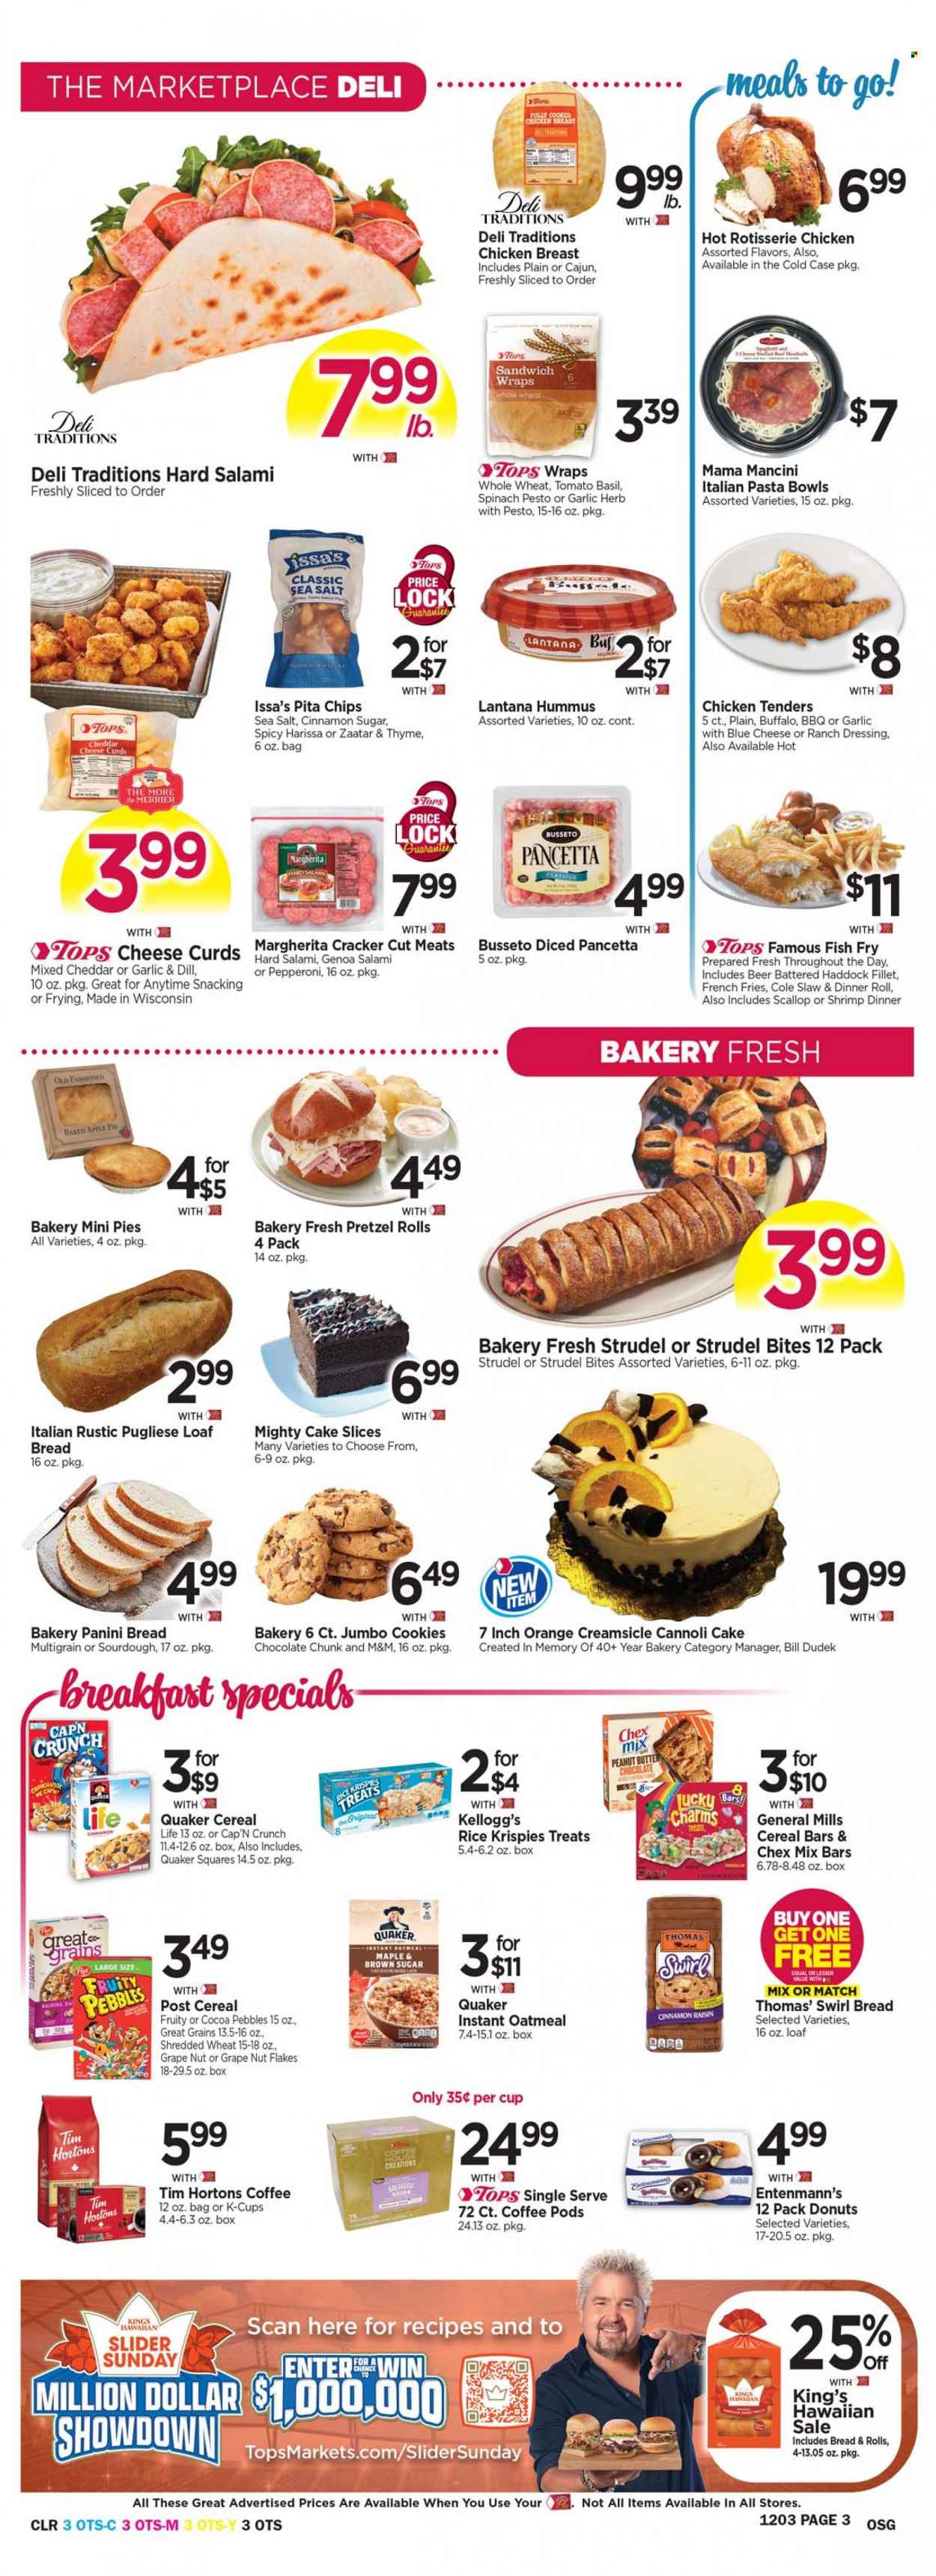 thumbnail - Tops Flyer - 11/27/2022 - 12/03/2022 - Sales products - bread, pretzels, cake, pie, dinner rolls, panini, strudel, wraps, apple pie, donut, Entenmann's, oranges, cod, scallops, haddock, fish, shrimps, fried fish, chicken roast, chicken tenders, Quaker, salami, pancetta, pepperoni, hummus, cheese curd, ranch dressing, potato fries, french fries, cookies, chocolate, M&M's, cereal bar, crackers, Kellogg's, chips, Chex Mix, pita chips, oatmeal, cereals, Rice Krispies, Cap'n Crunch, Fruity Pebbles, dill, herbs, dressing, Classico, peanut butter, coffee pods, coffee capsules, K-Cups, beer, chicken breasts. Page 3.